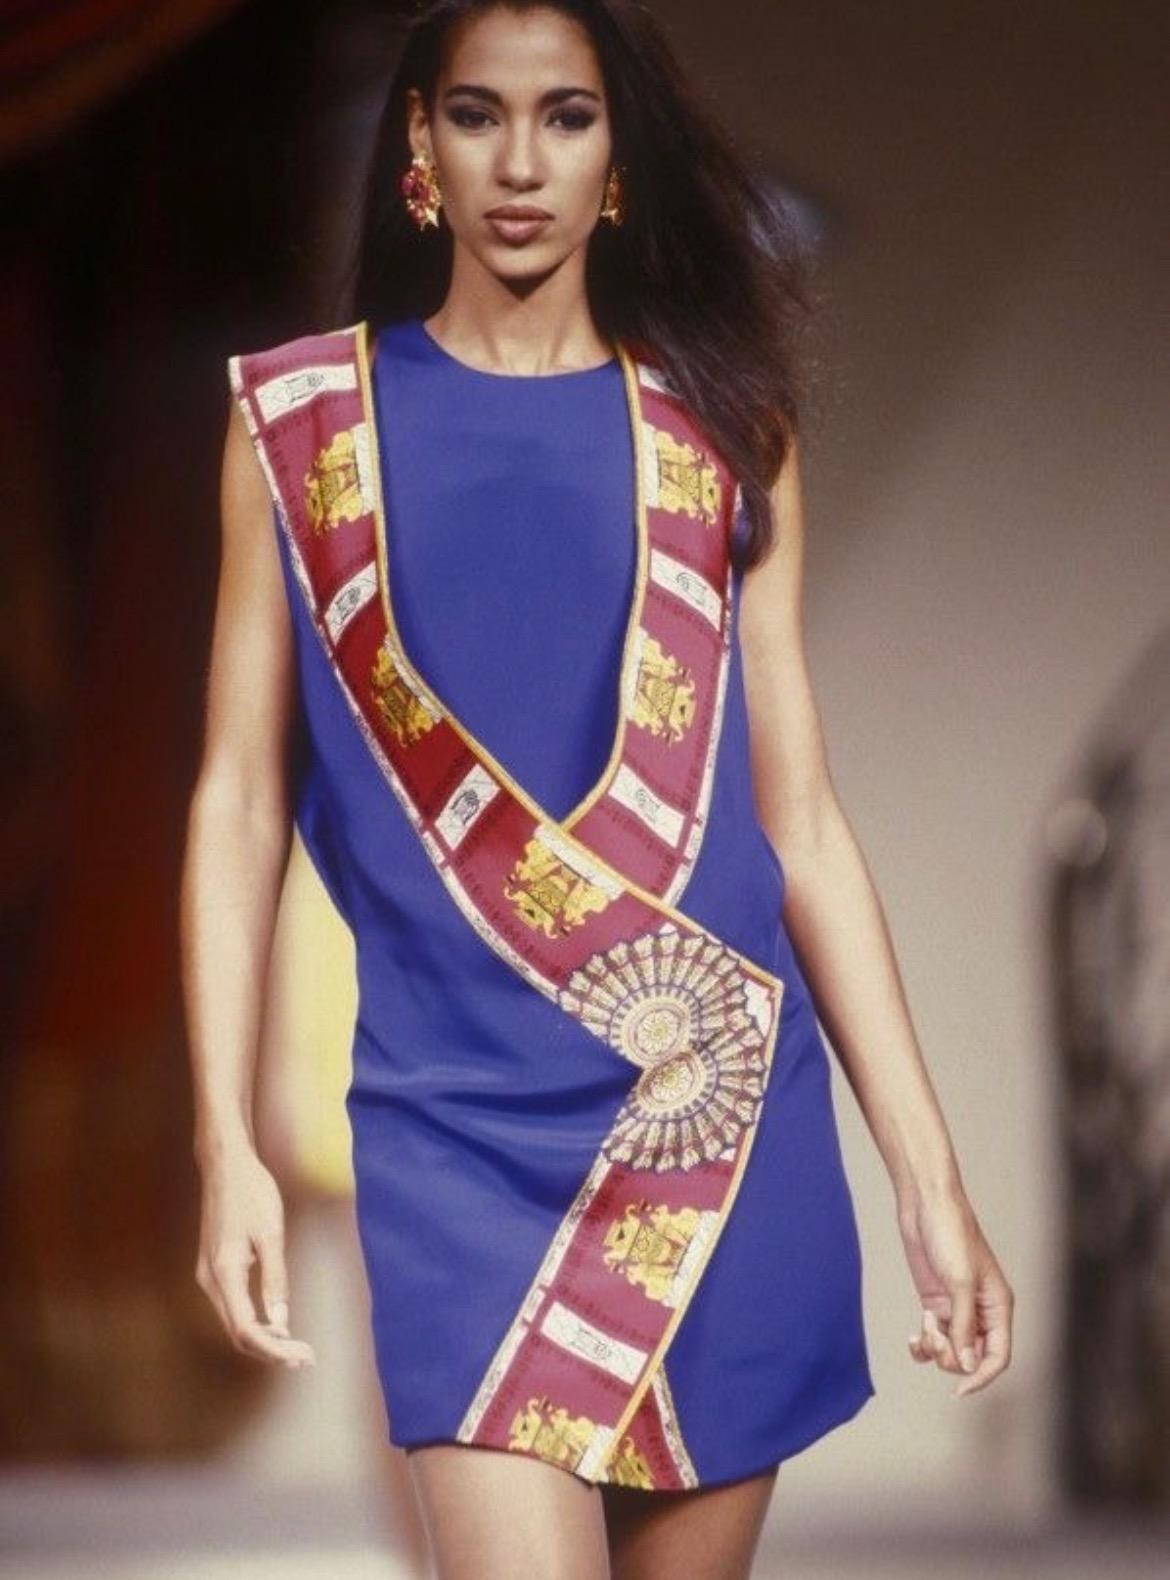 Presenting a stunning Atelier Versace dress set from the S/S 1991 collection, designed by Gianni Versace. This extraordinary piece can be seen on the season's haute couture runway. Comprised of two pieces, the body of the dress is made of a simple